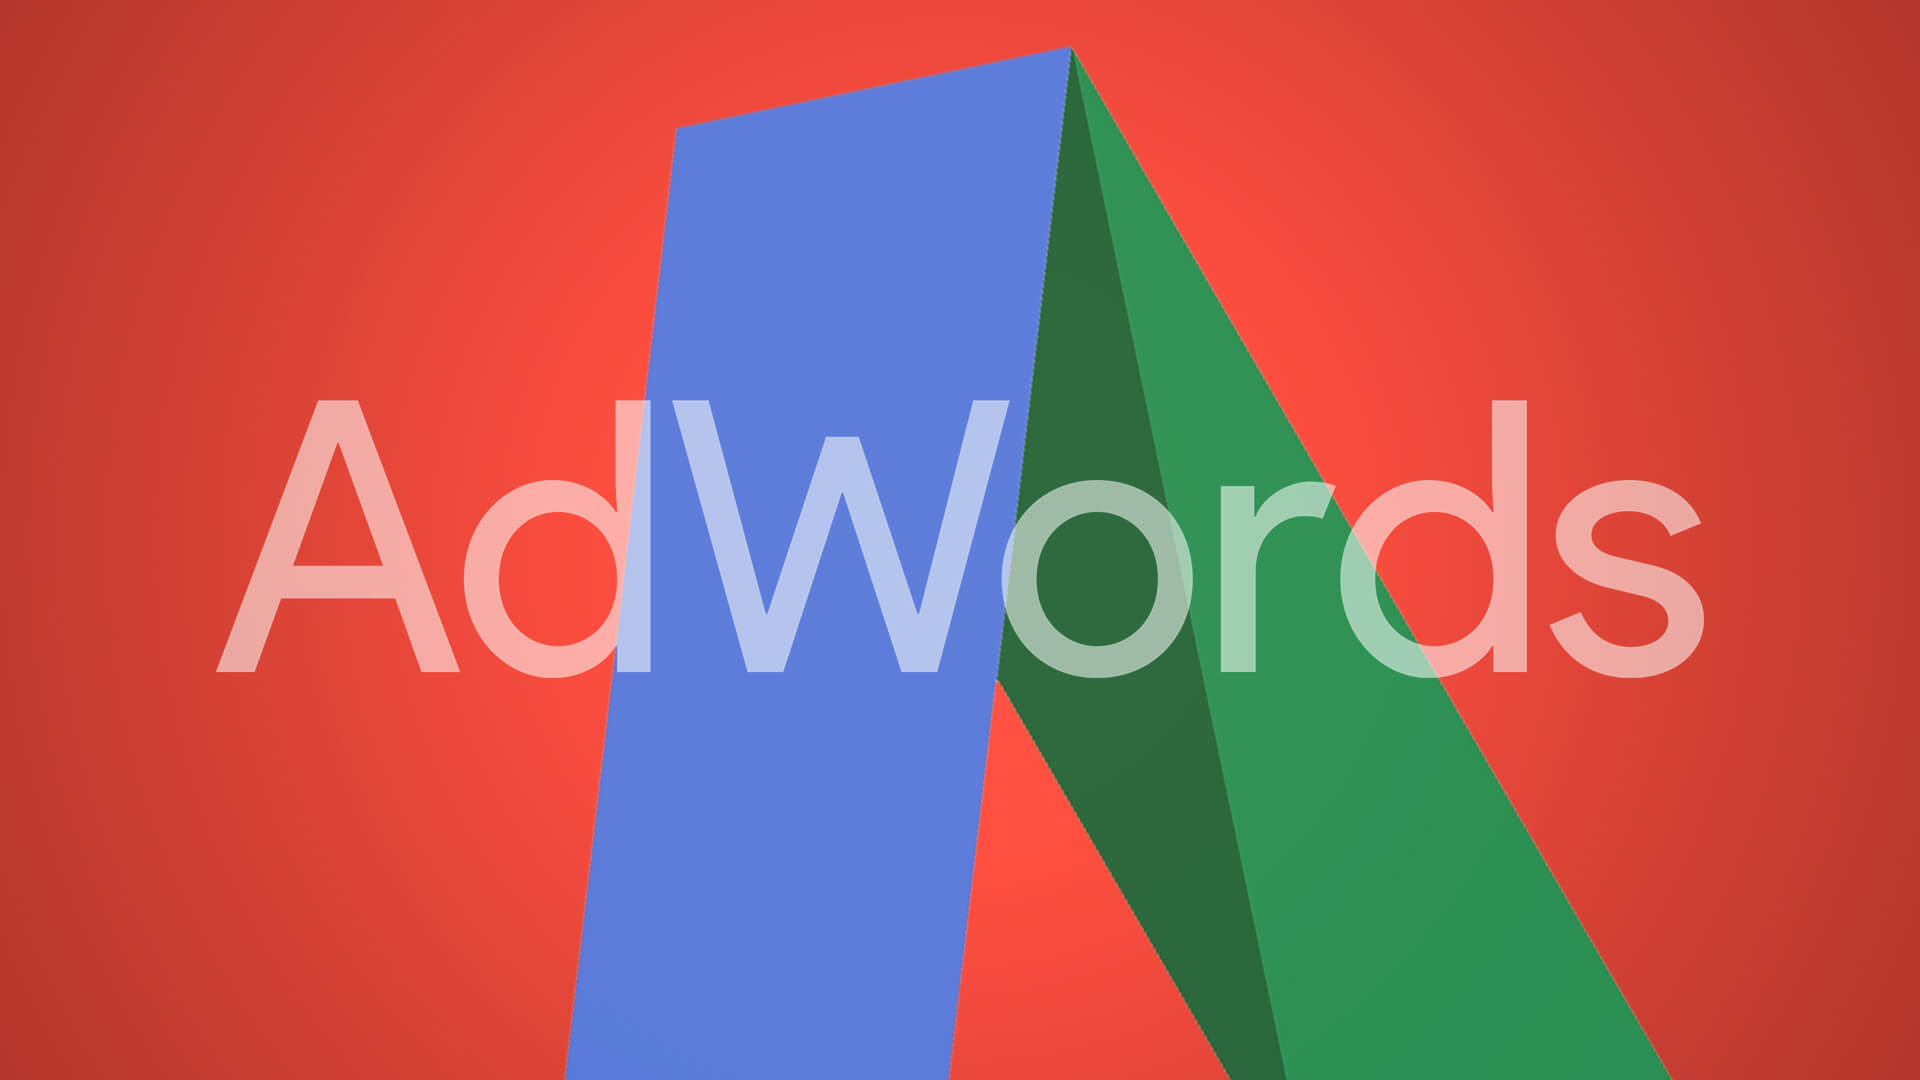 google-adwords-red2-1920